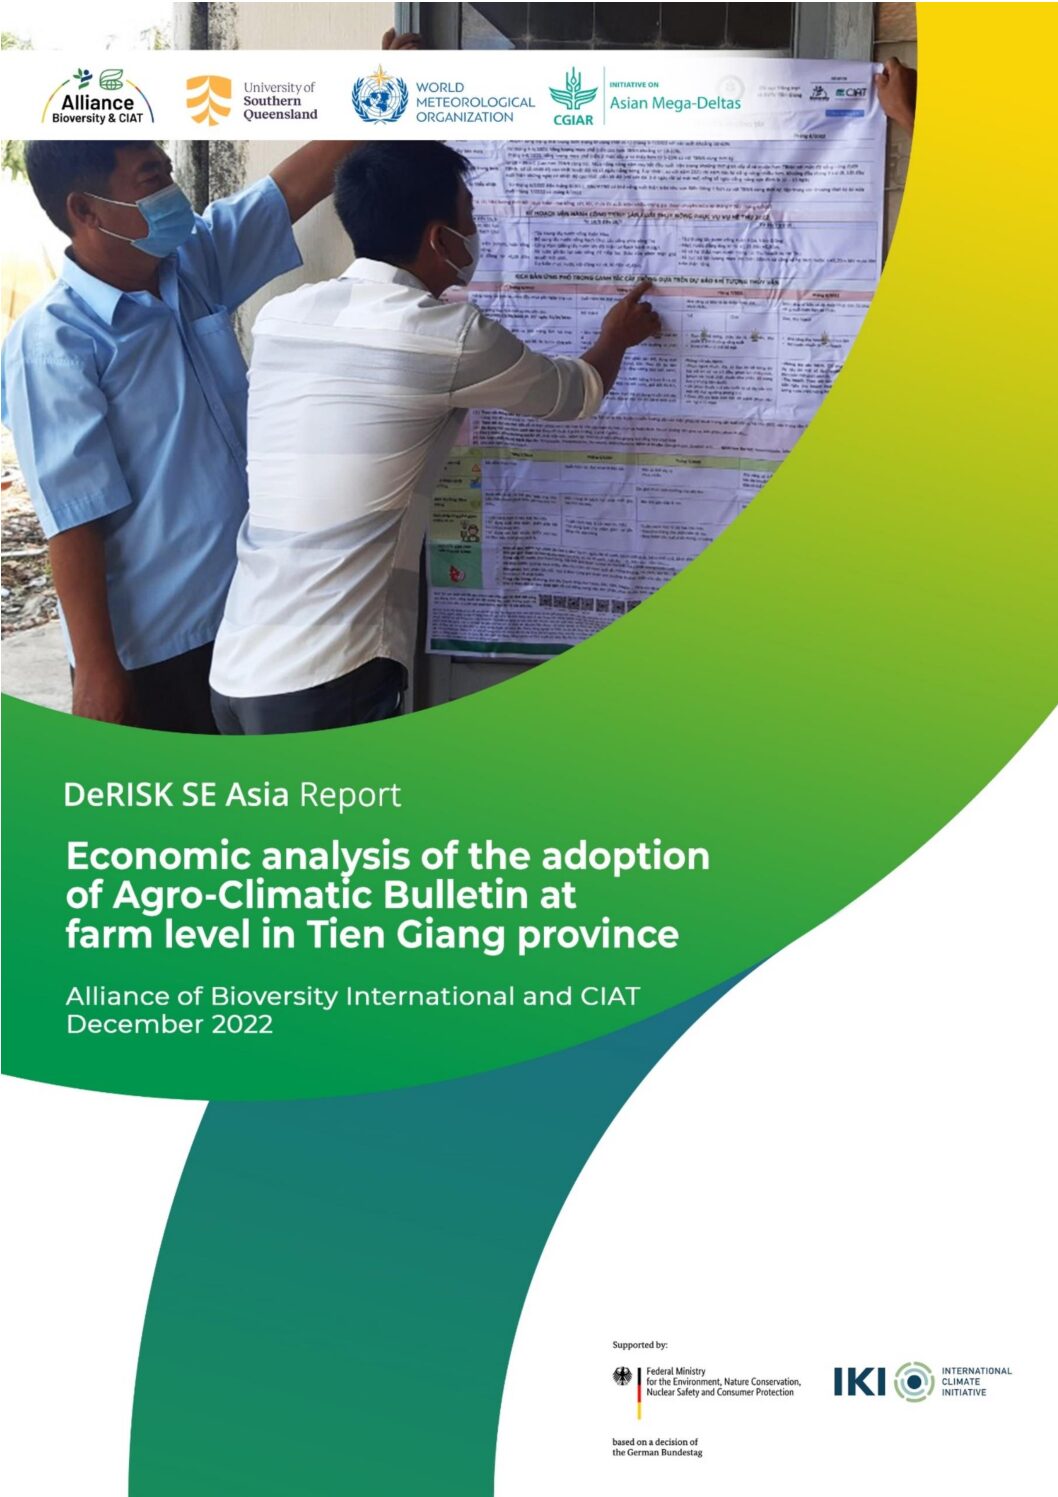 Economic analysis of the adoption of Agro-Climatic Bulletin (ACB) at farm level in Tien Giang province